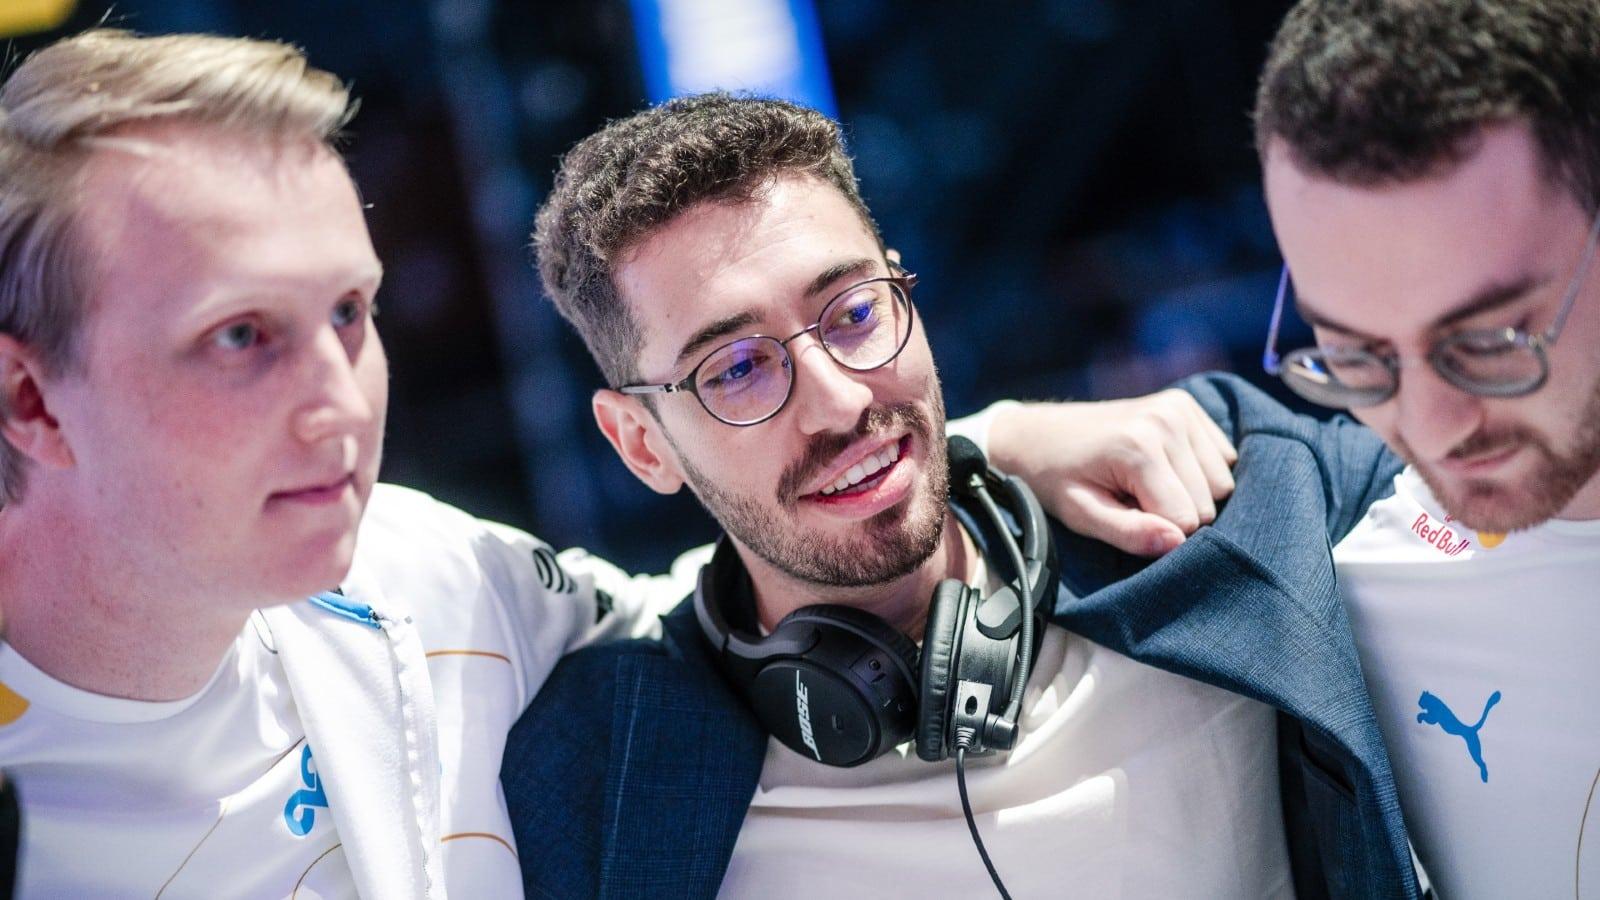 Mithy with C9 at Worlds 2021